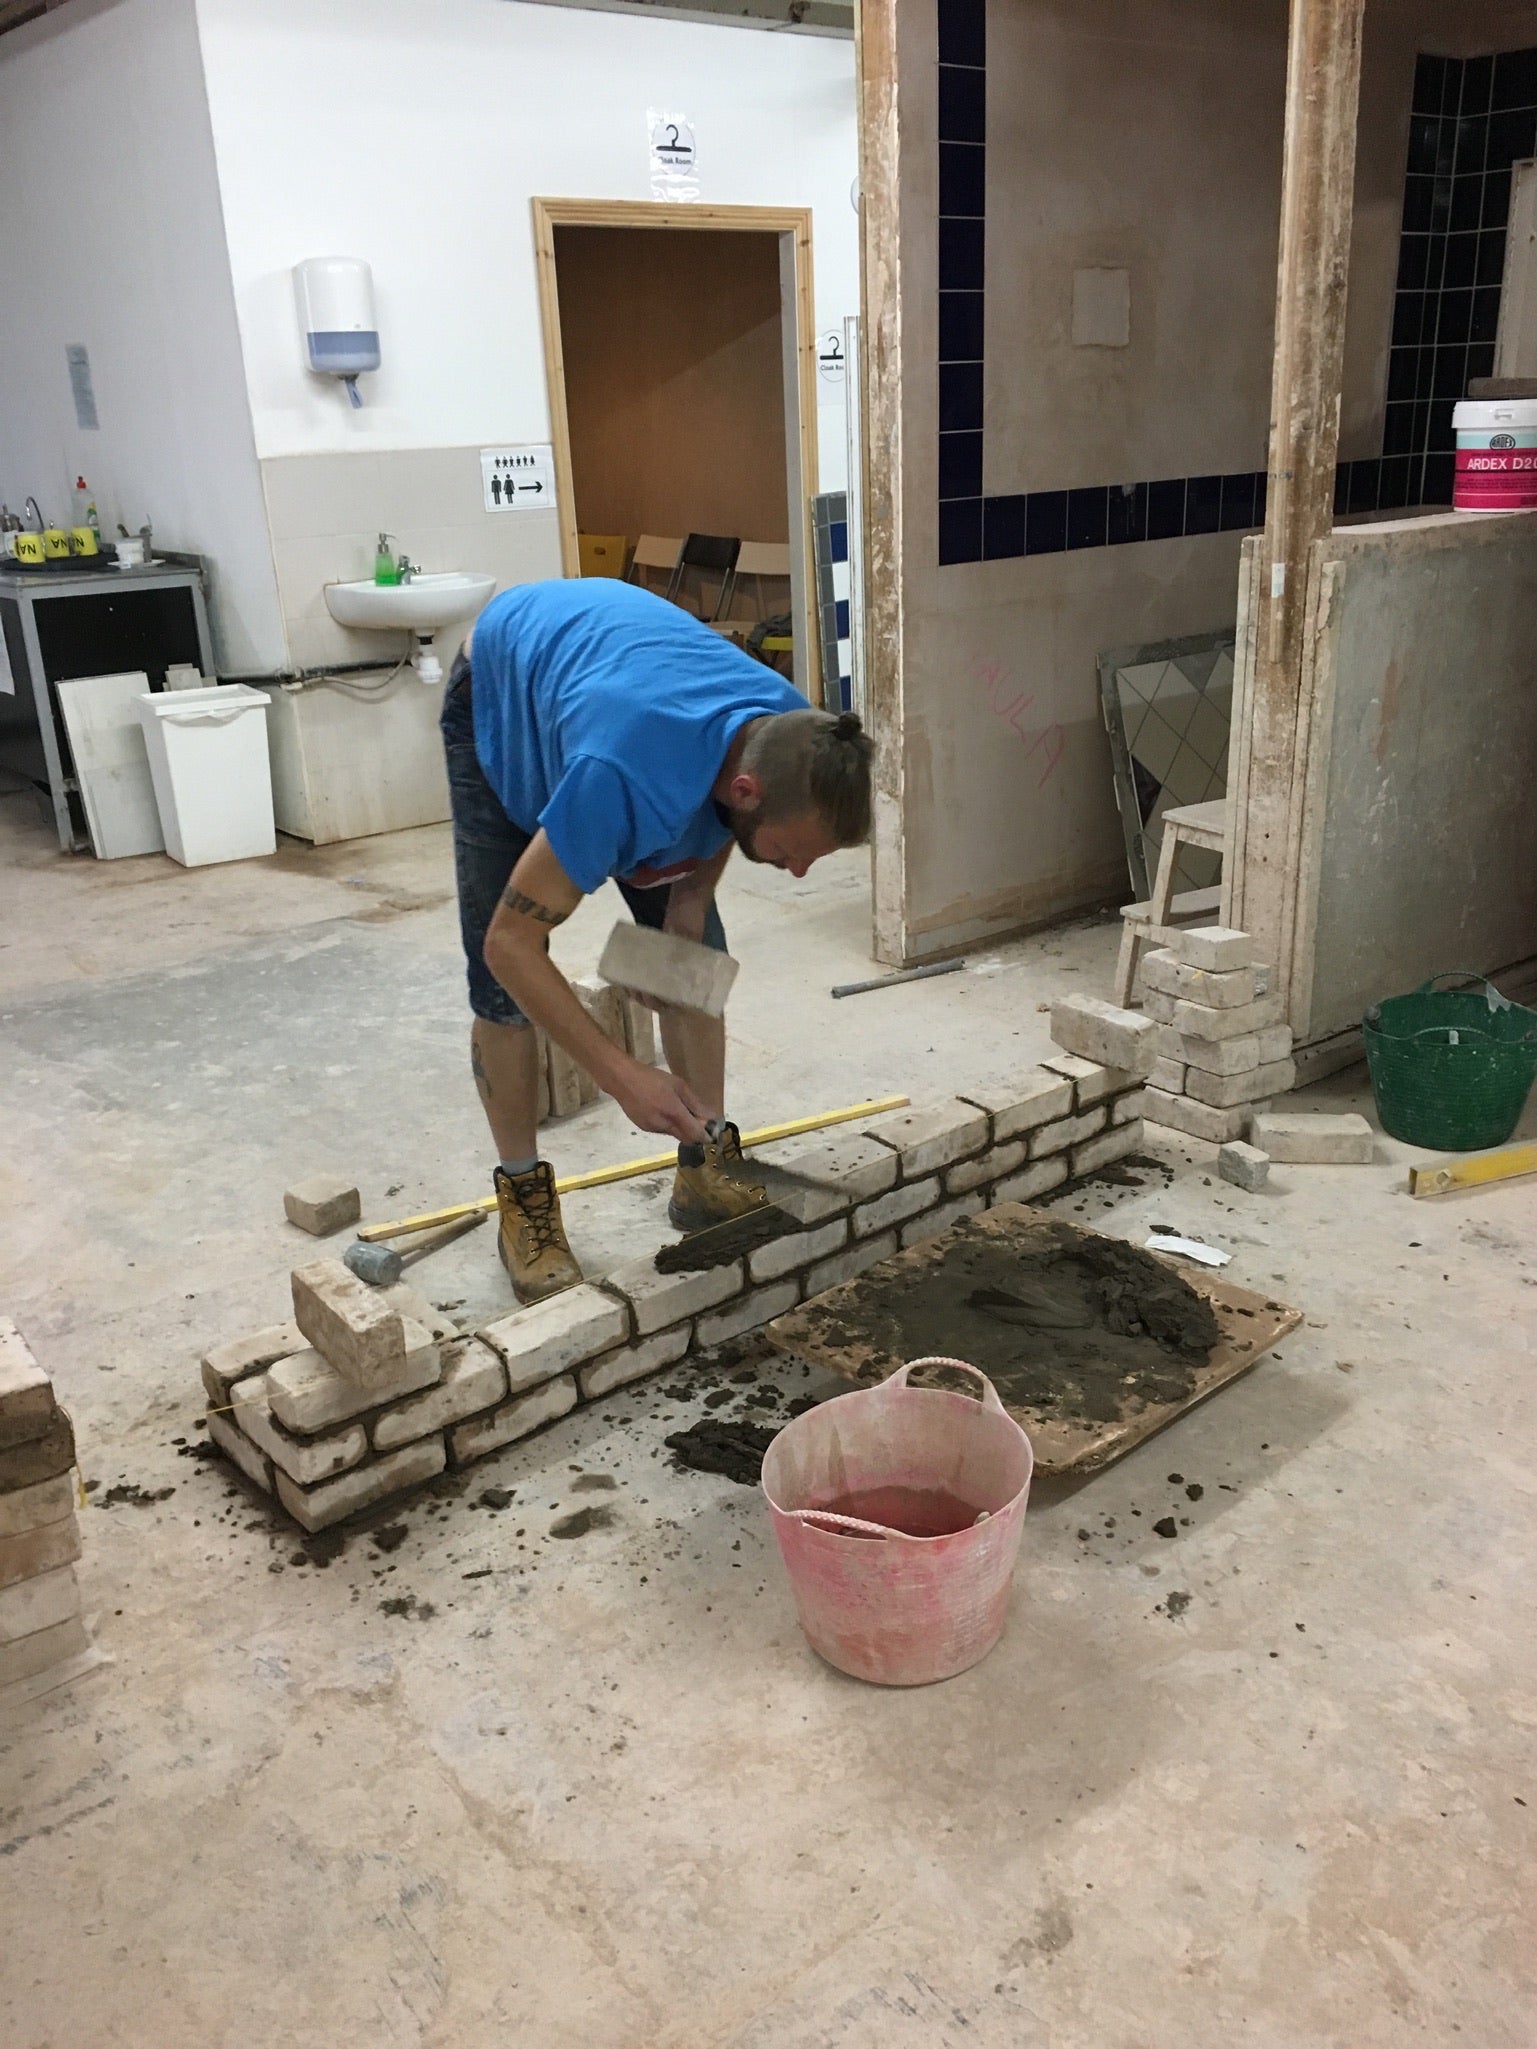 Bricklaying Course - Garden or Cavity Extra 2 Days